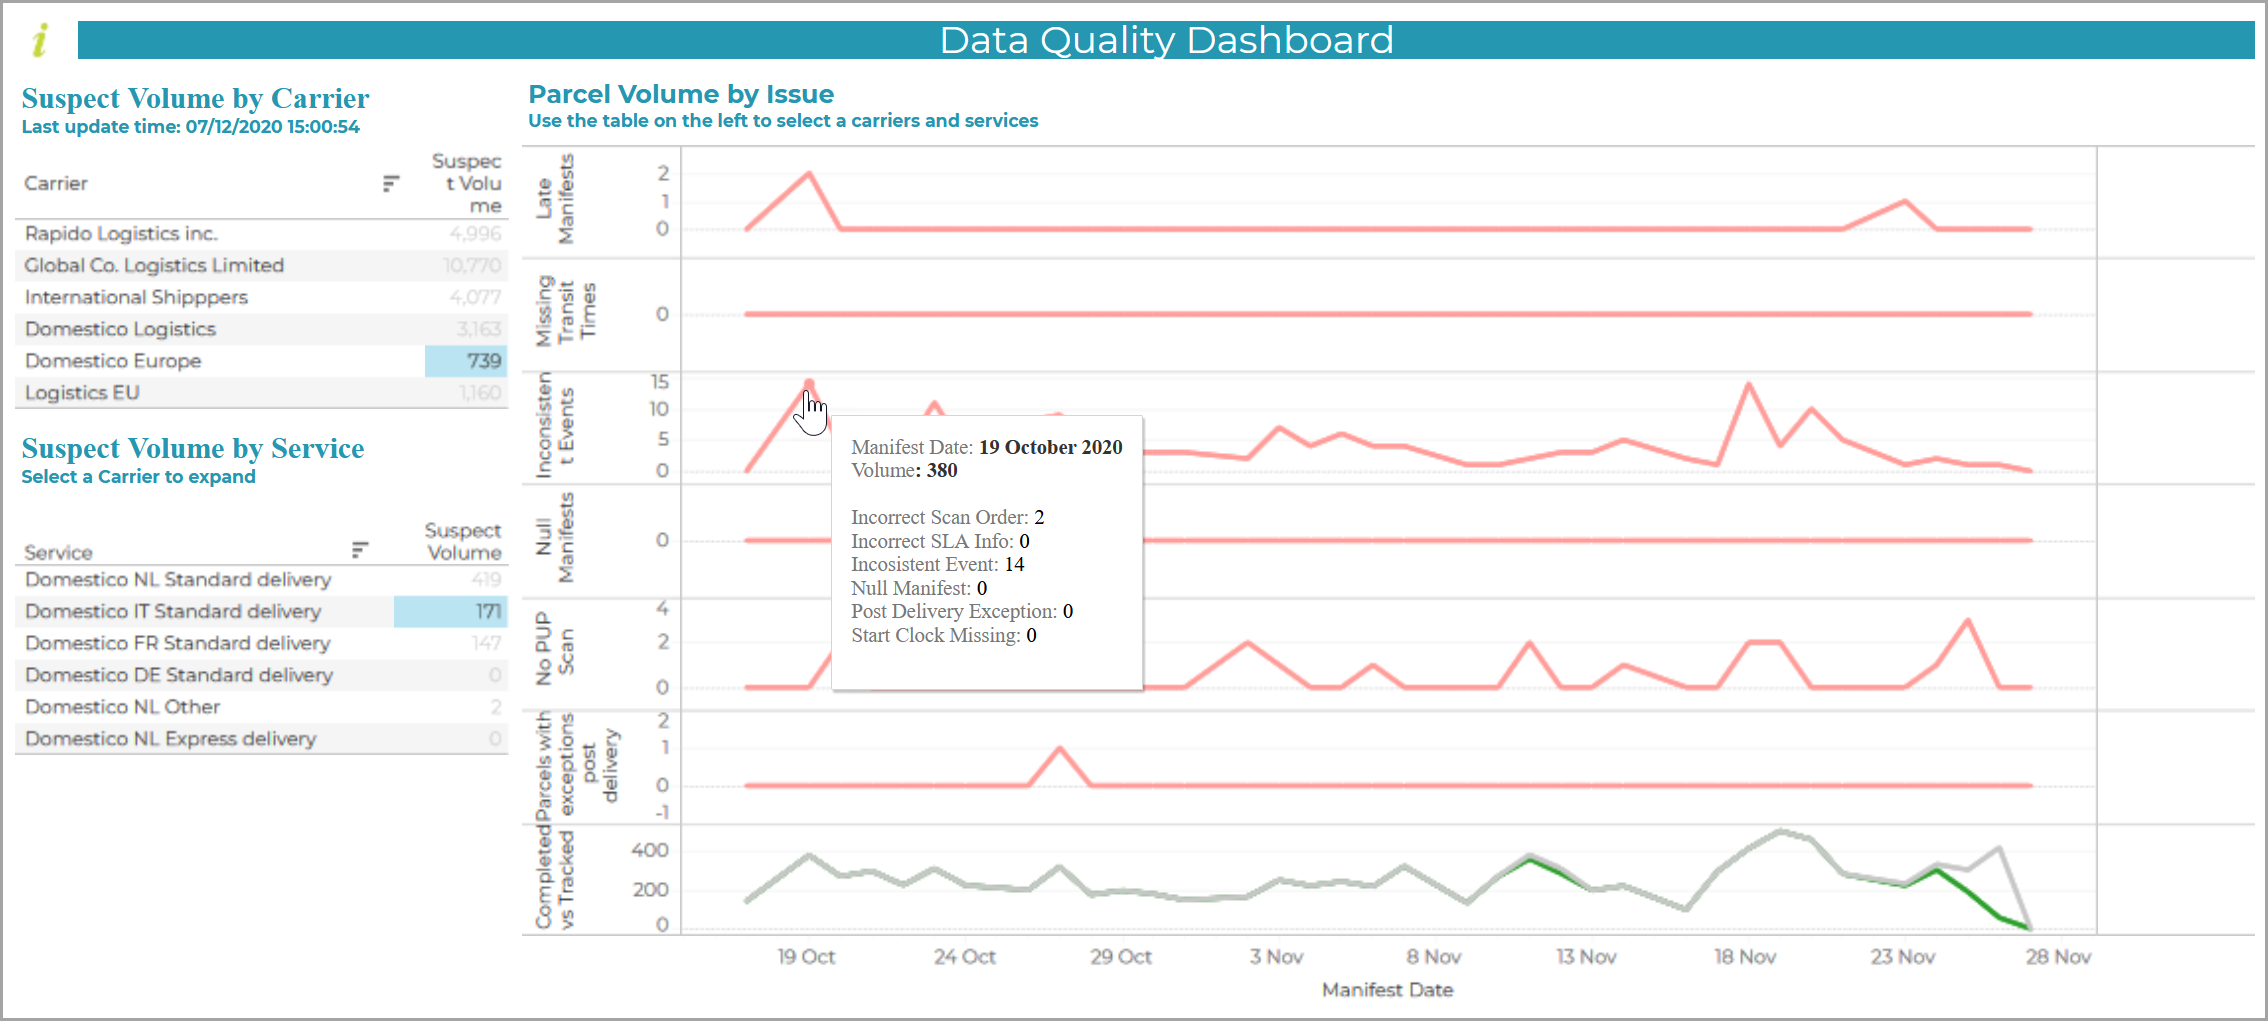 Data_Quality_Dashboard.png